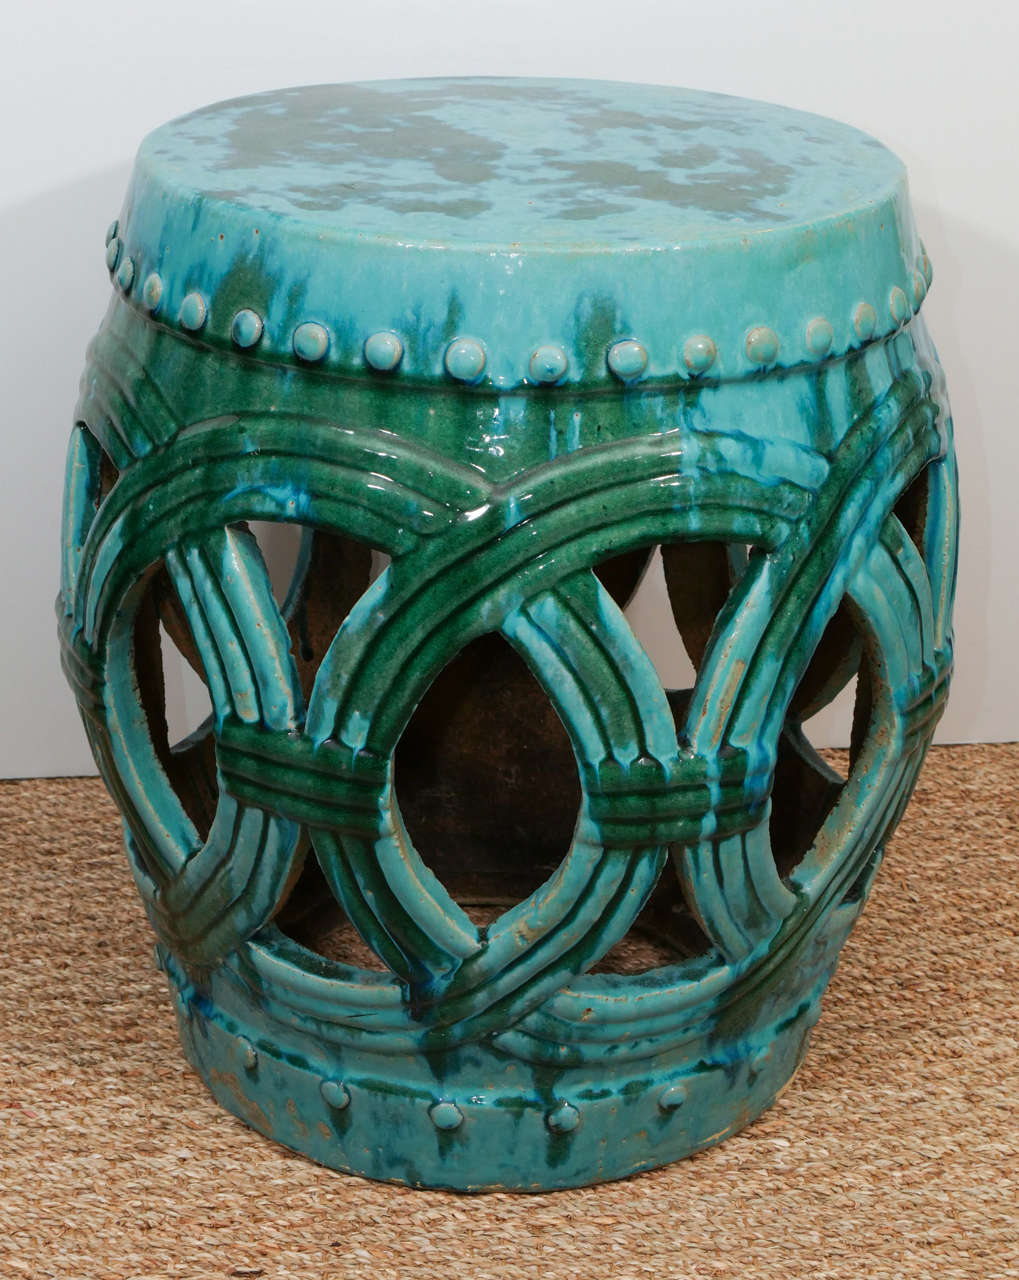 The color on these ceramic stools is what makes them special. In a beautiful green mixed with a stunning turquoise, these can go inside or out, used as extra seating or side tables.